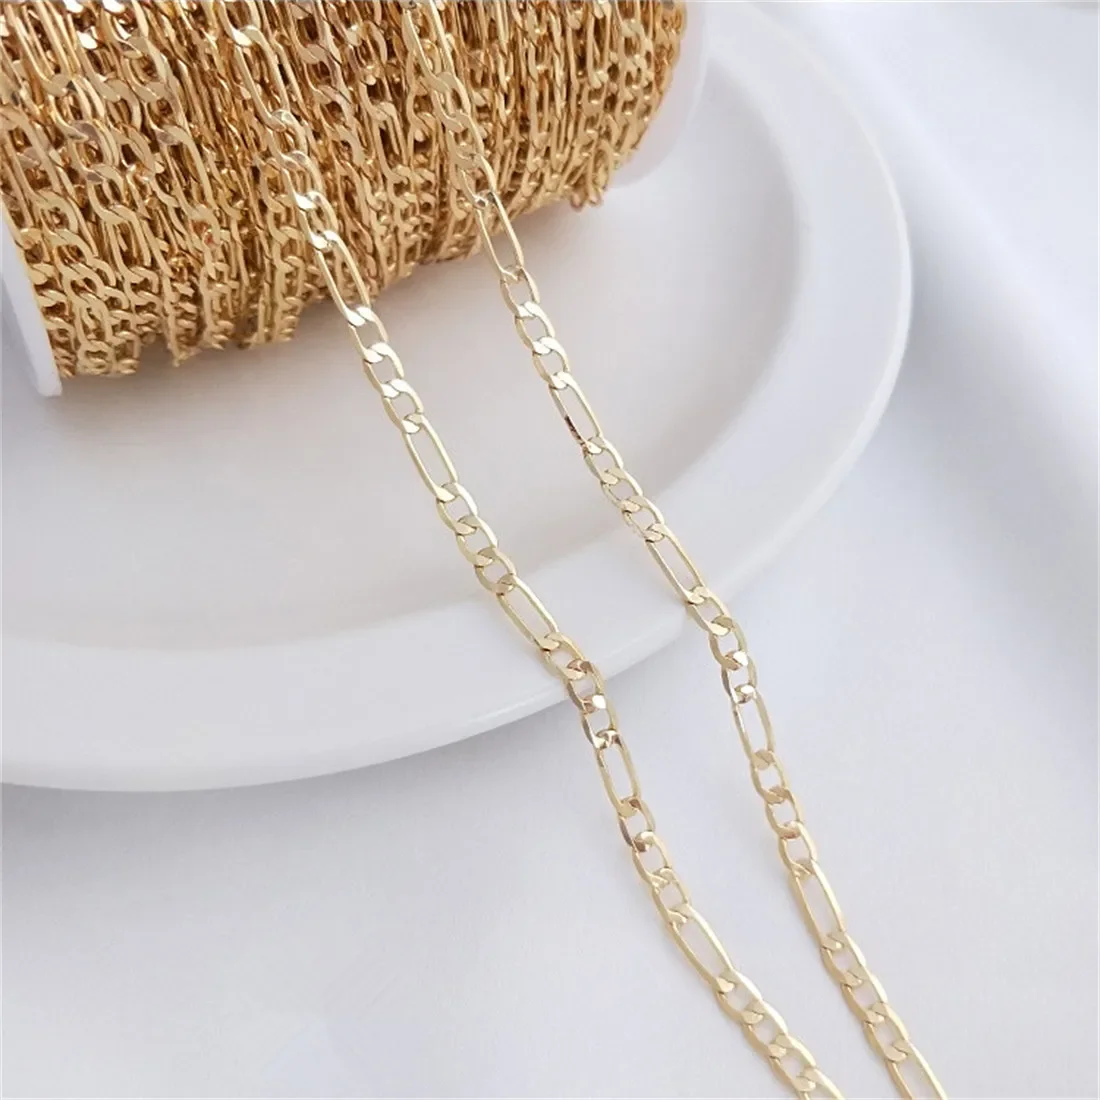 

14K Package of Real Gold 3+1 Flat Chain Handmade Loose Diy Fashion Necklace Bracelet with Chain Jewelry Materials B646